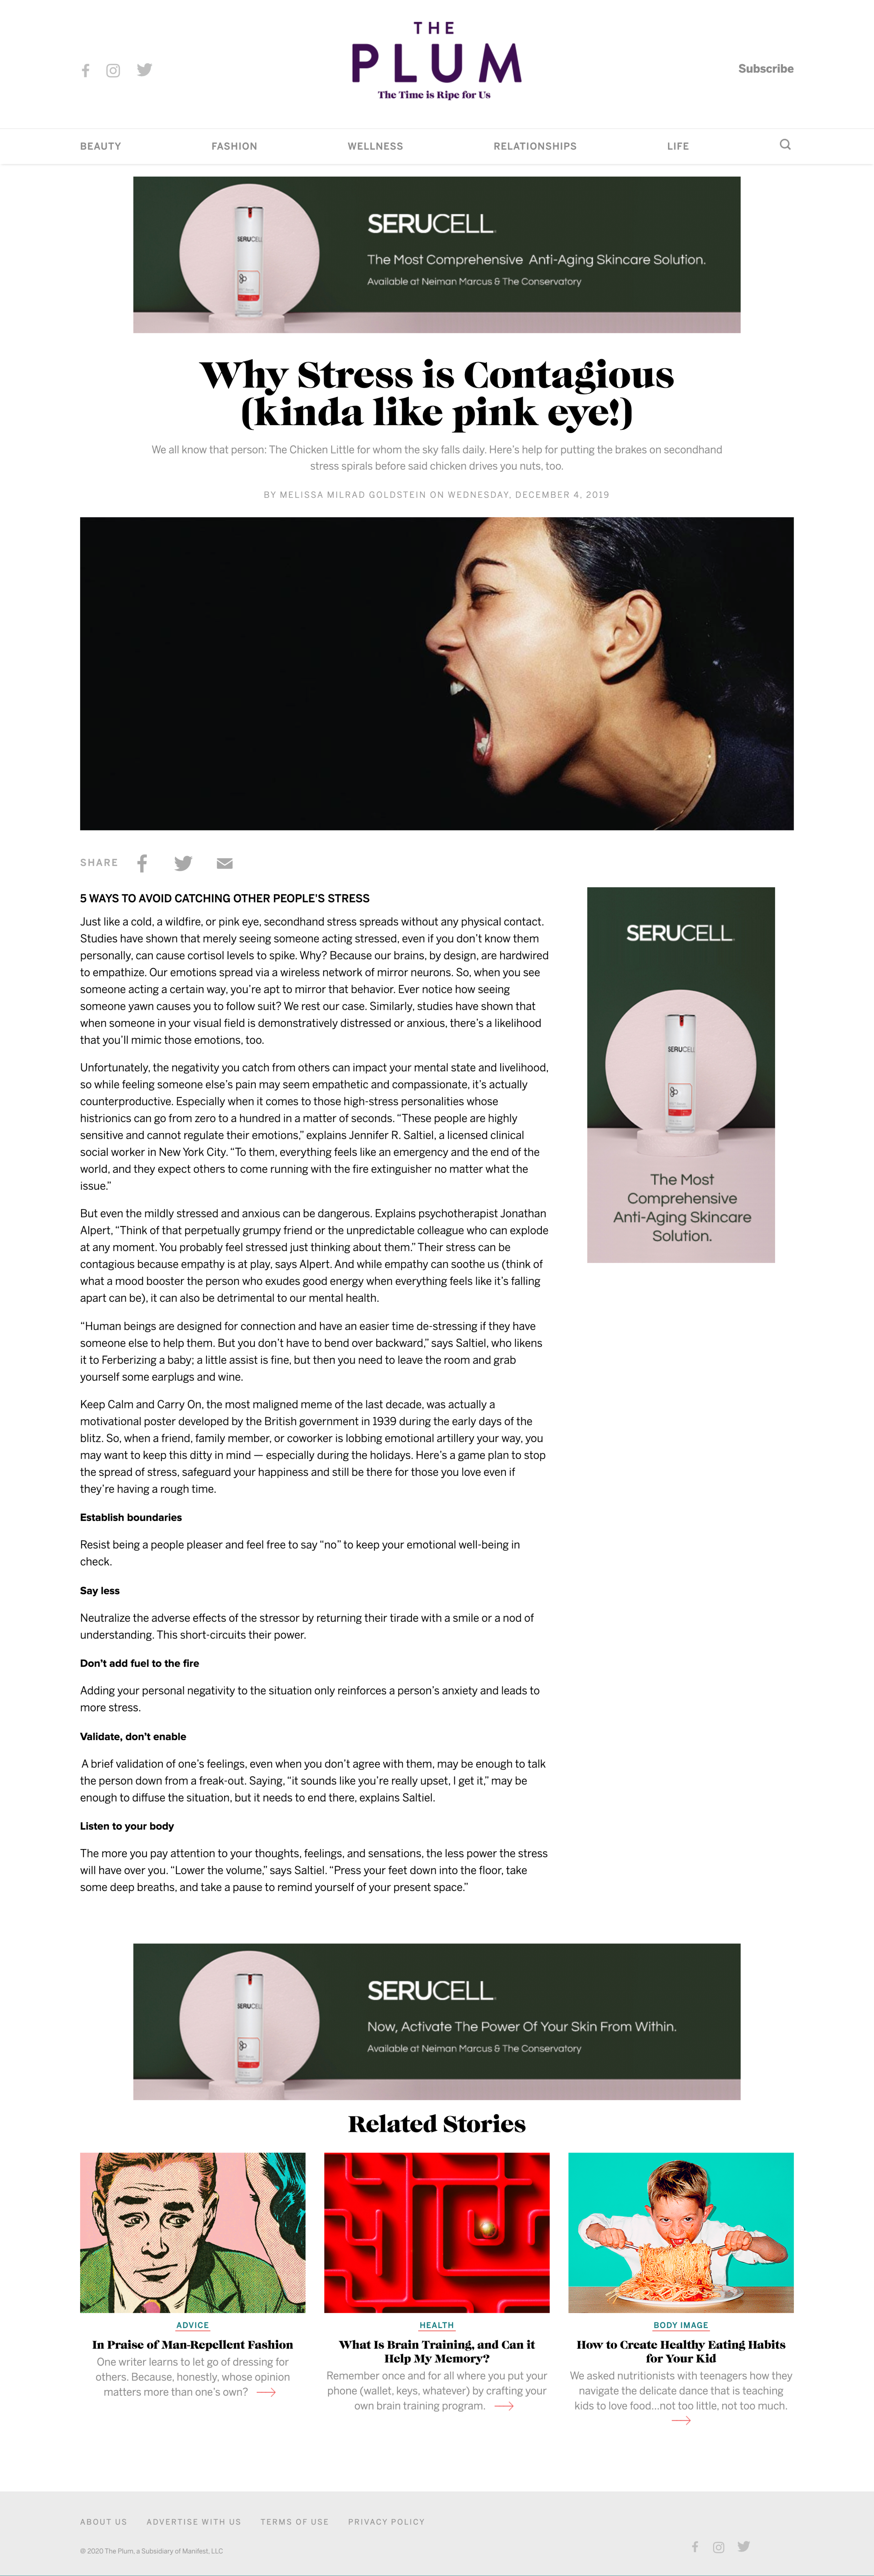 screencapture-theplumonline-wellness-why-stress-contagious-kinda-pink-eye-2020-02-05-21_05_49.png